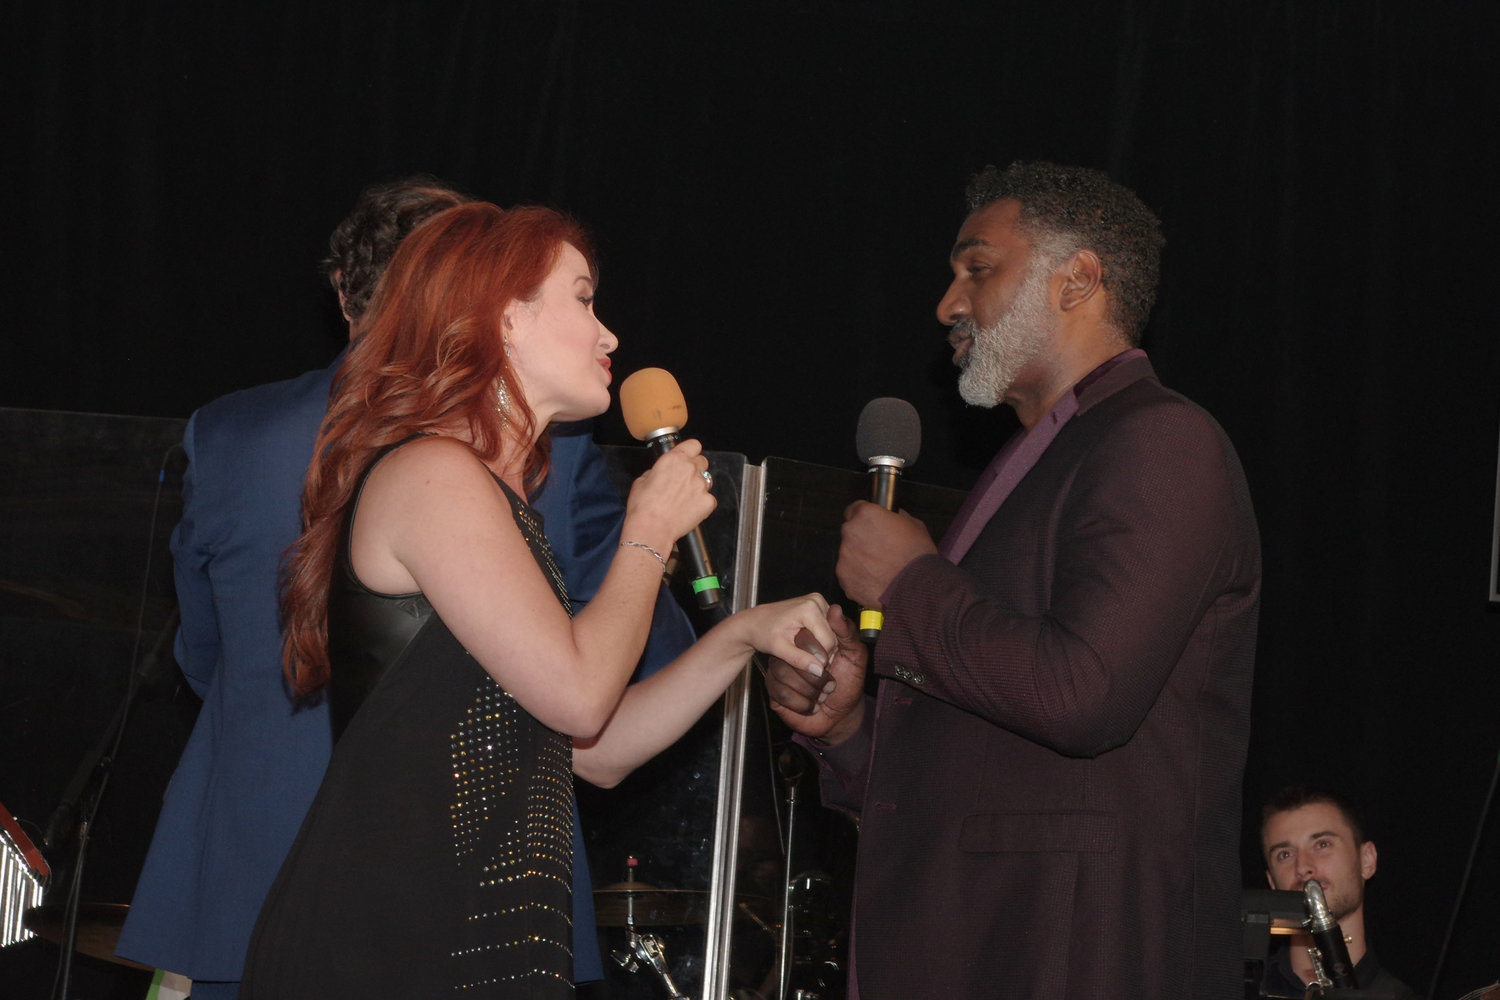 Sierra Boggess and Norm Lewis performed at the event.